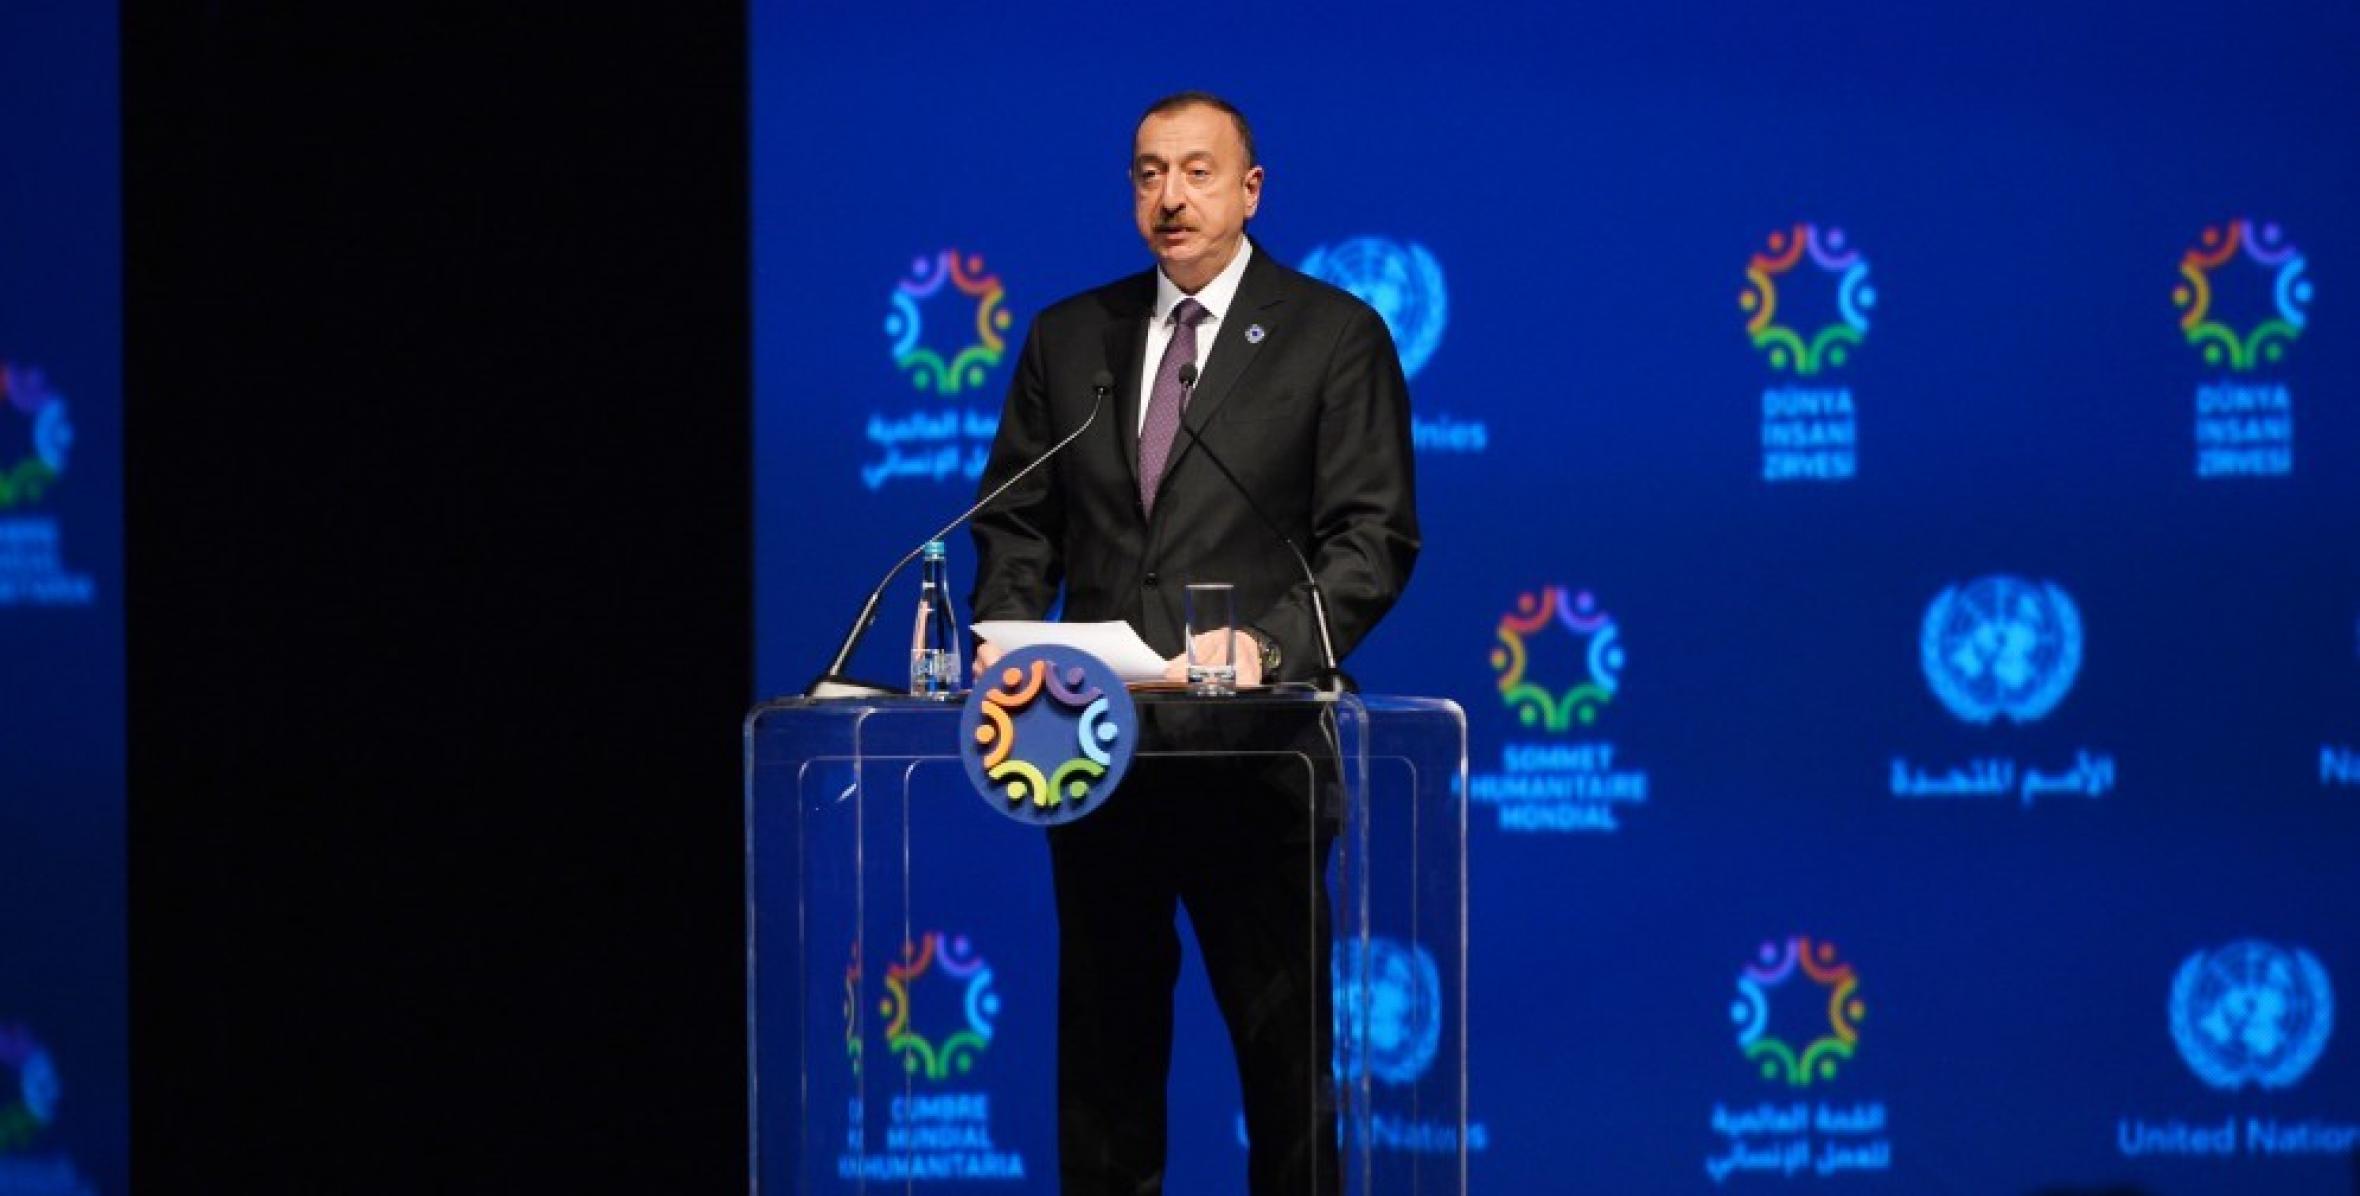 Speech by Ilham Aliyev at the World Humanitarian Summit in Istanbul